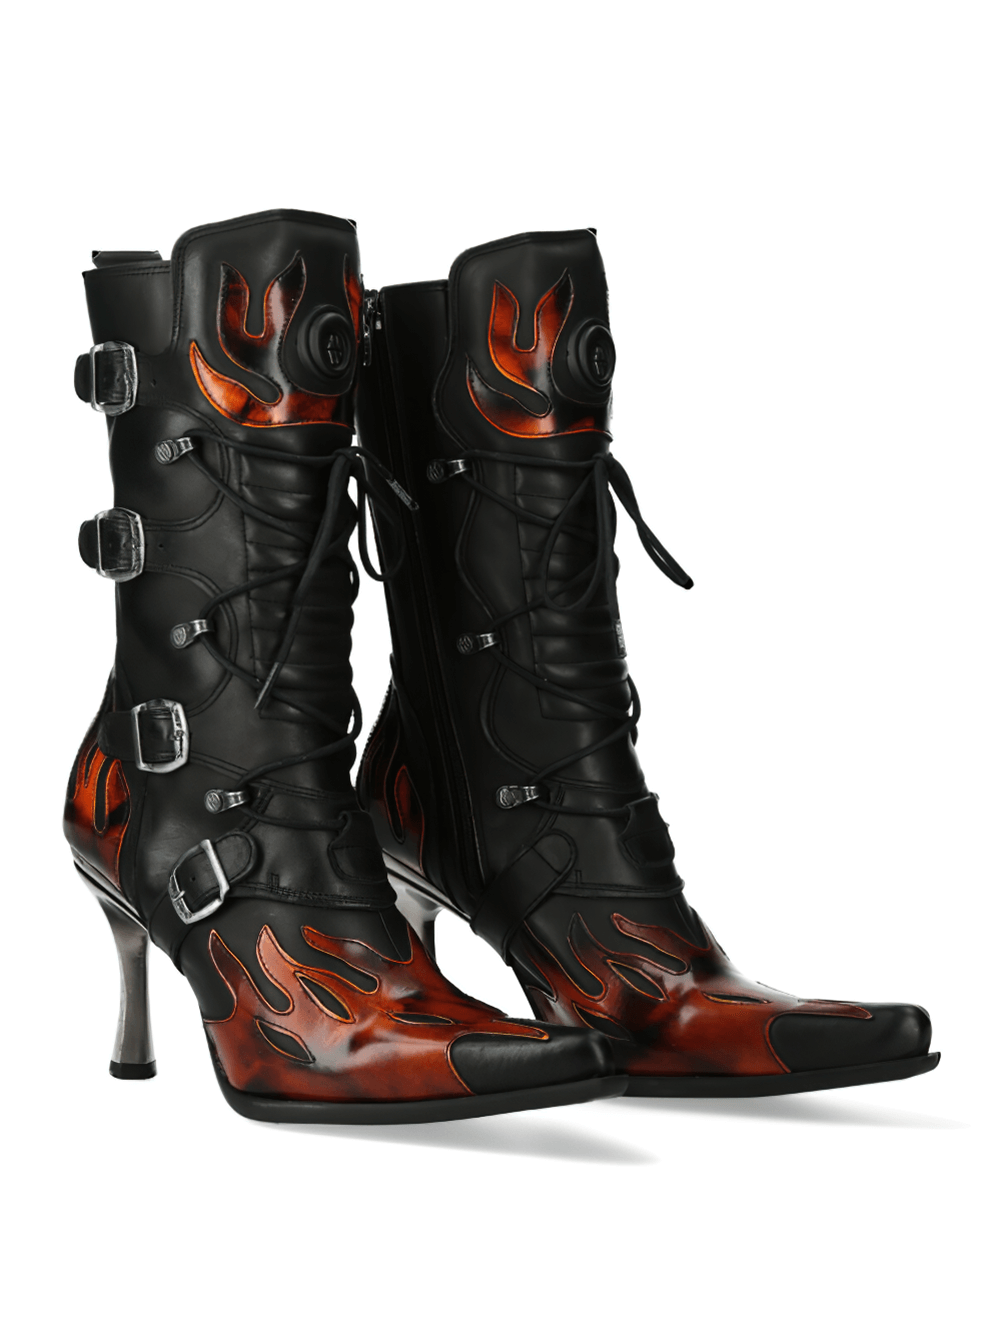 NEW ROCK Heeled Lace-Up Boots with Flame Design